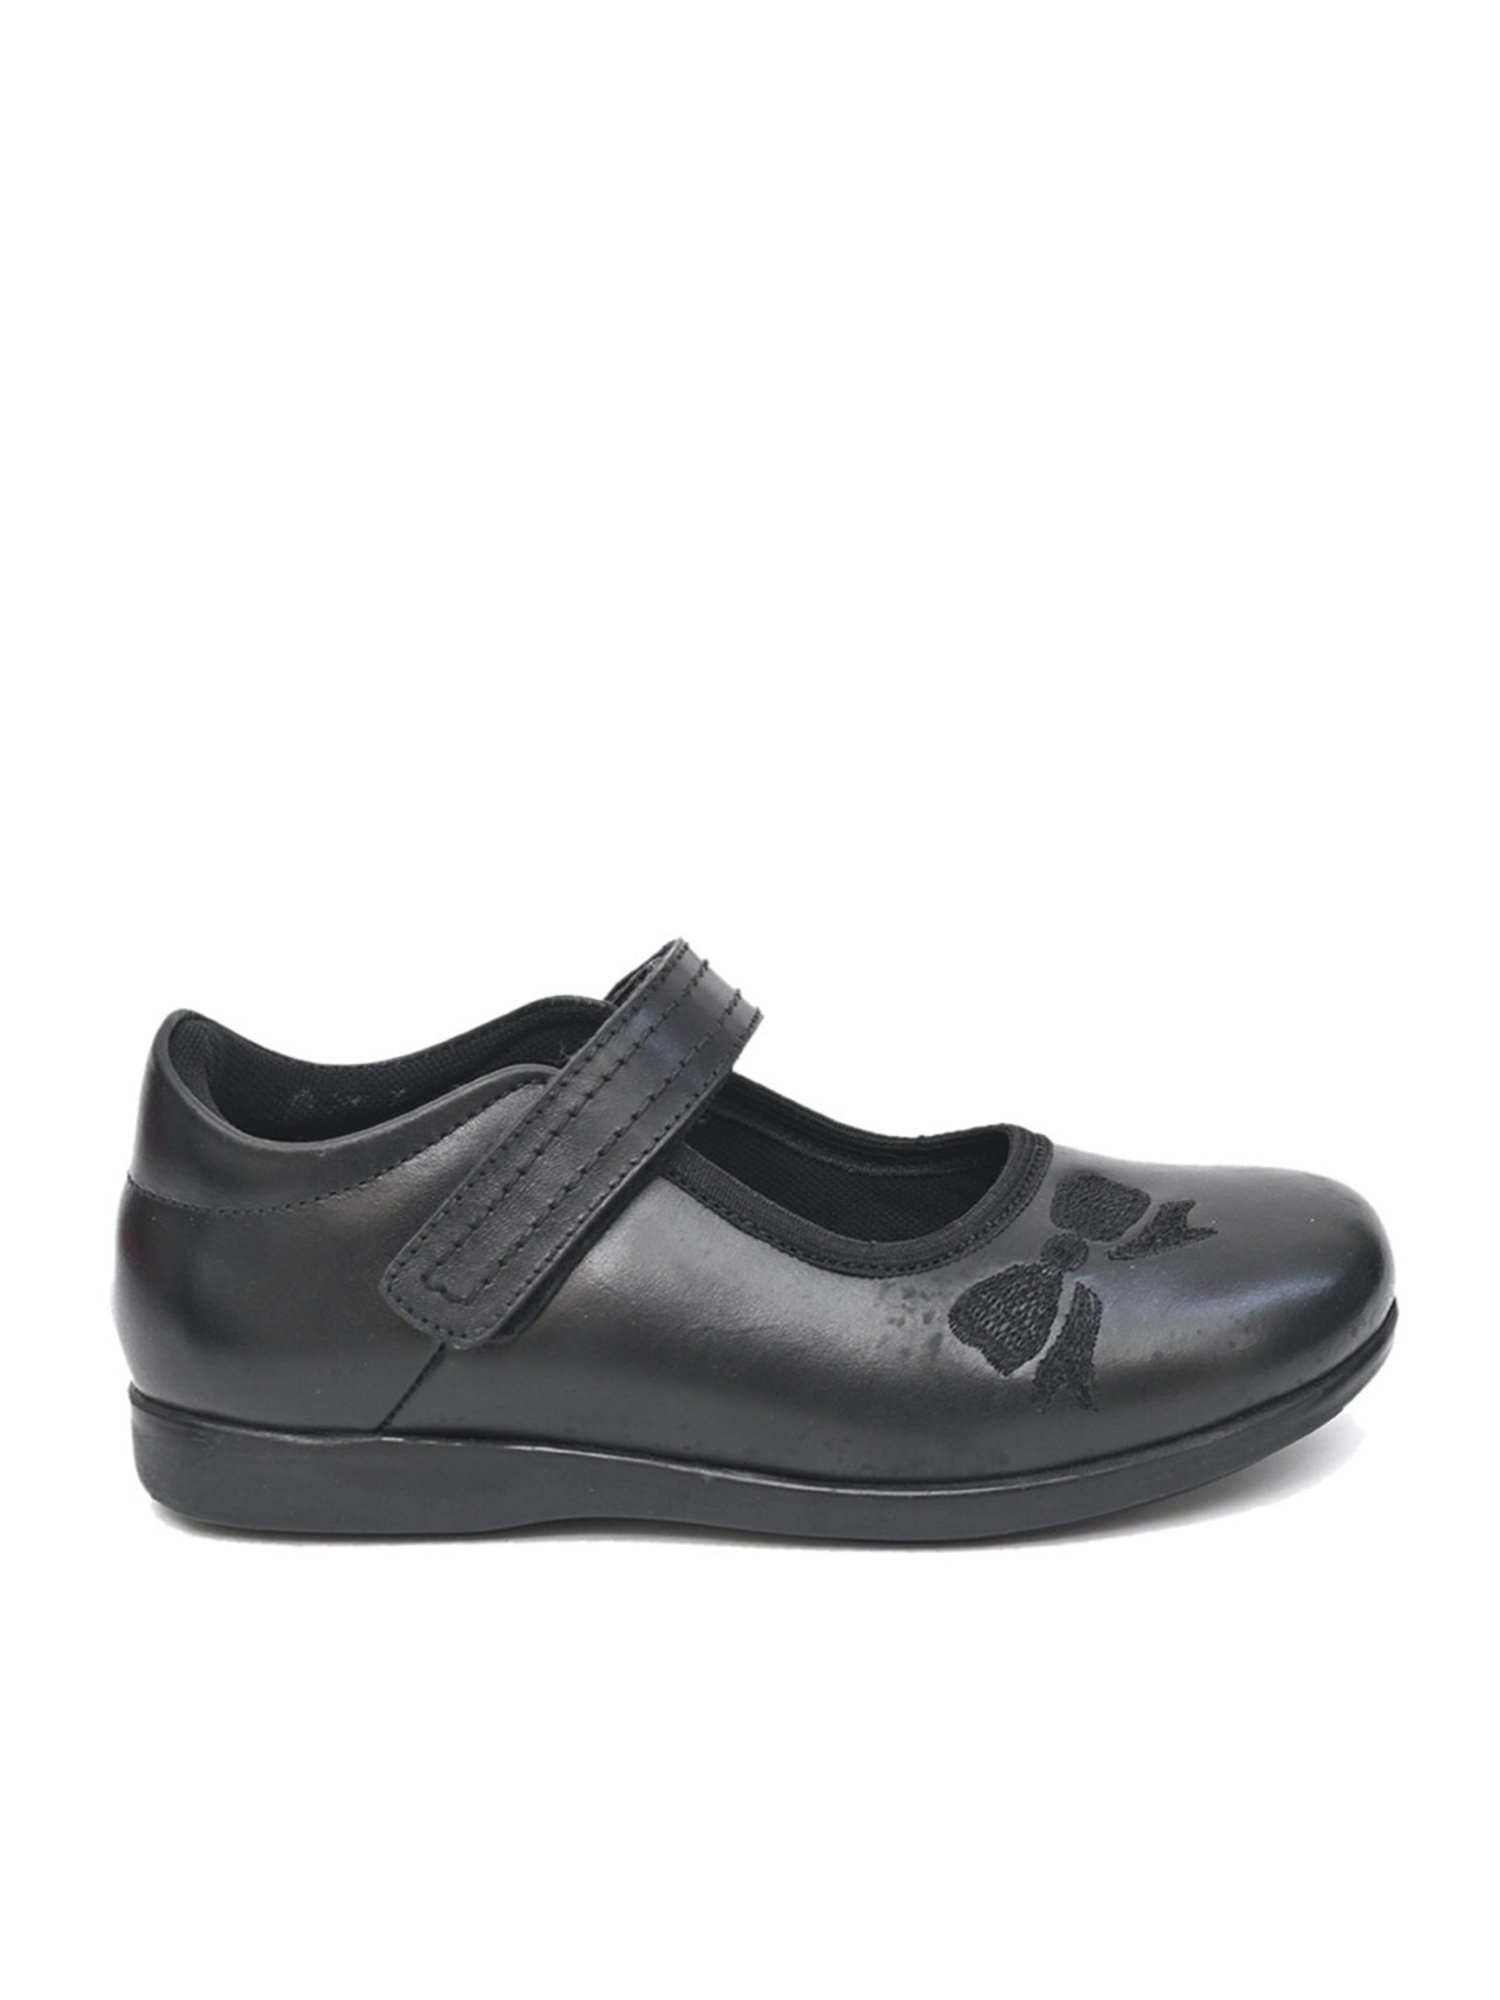 Back to School Shoes For Juniors | Young Soles - Young Soles London